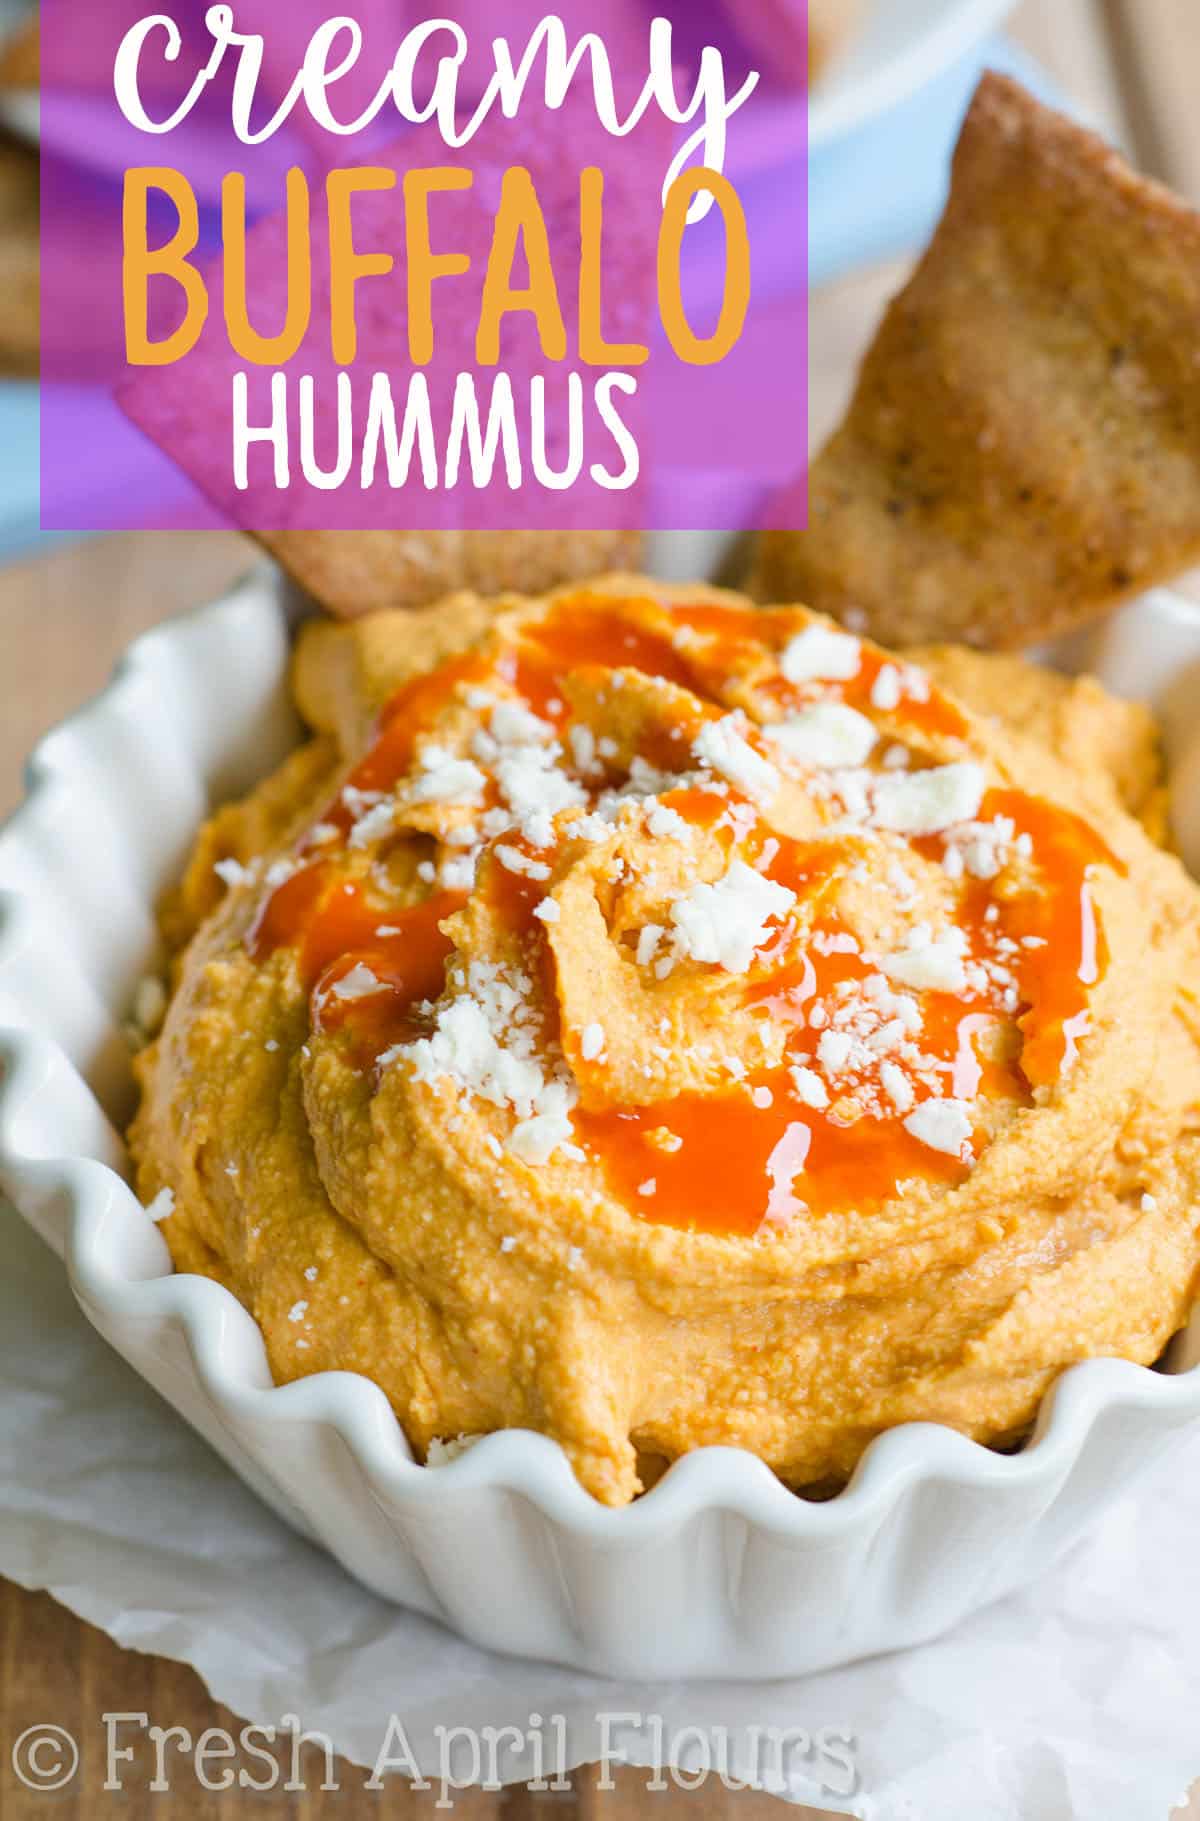 Smooth hummus loaded with spices and creamy blue cheese, perfect for dipping with homemade pita chips or your favorite vegetables. via @frshaprilflours